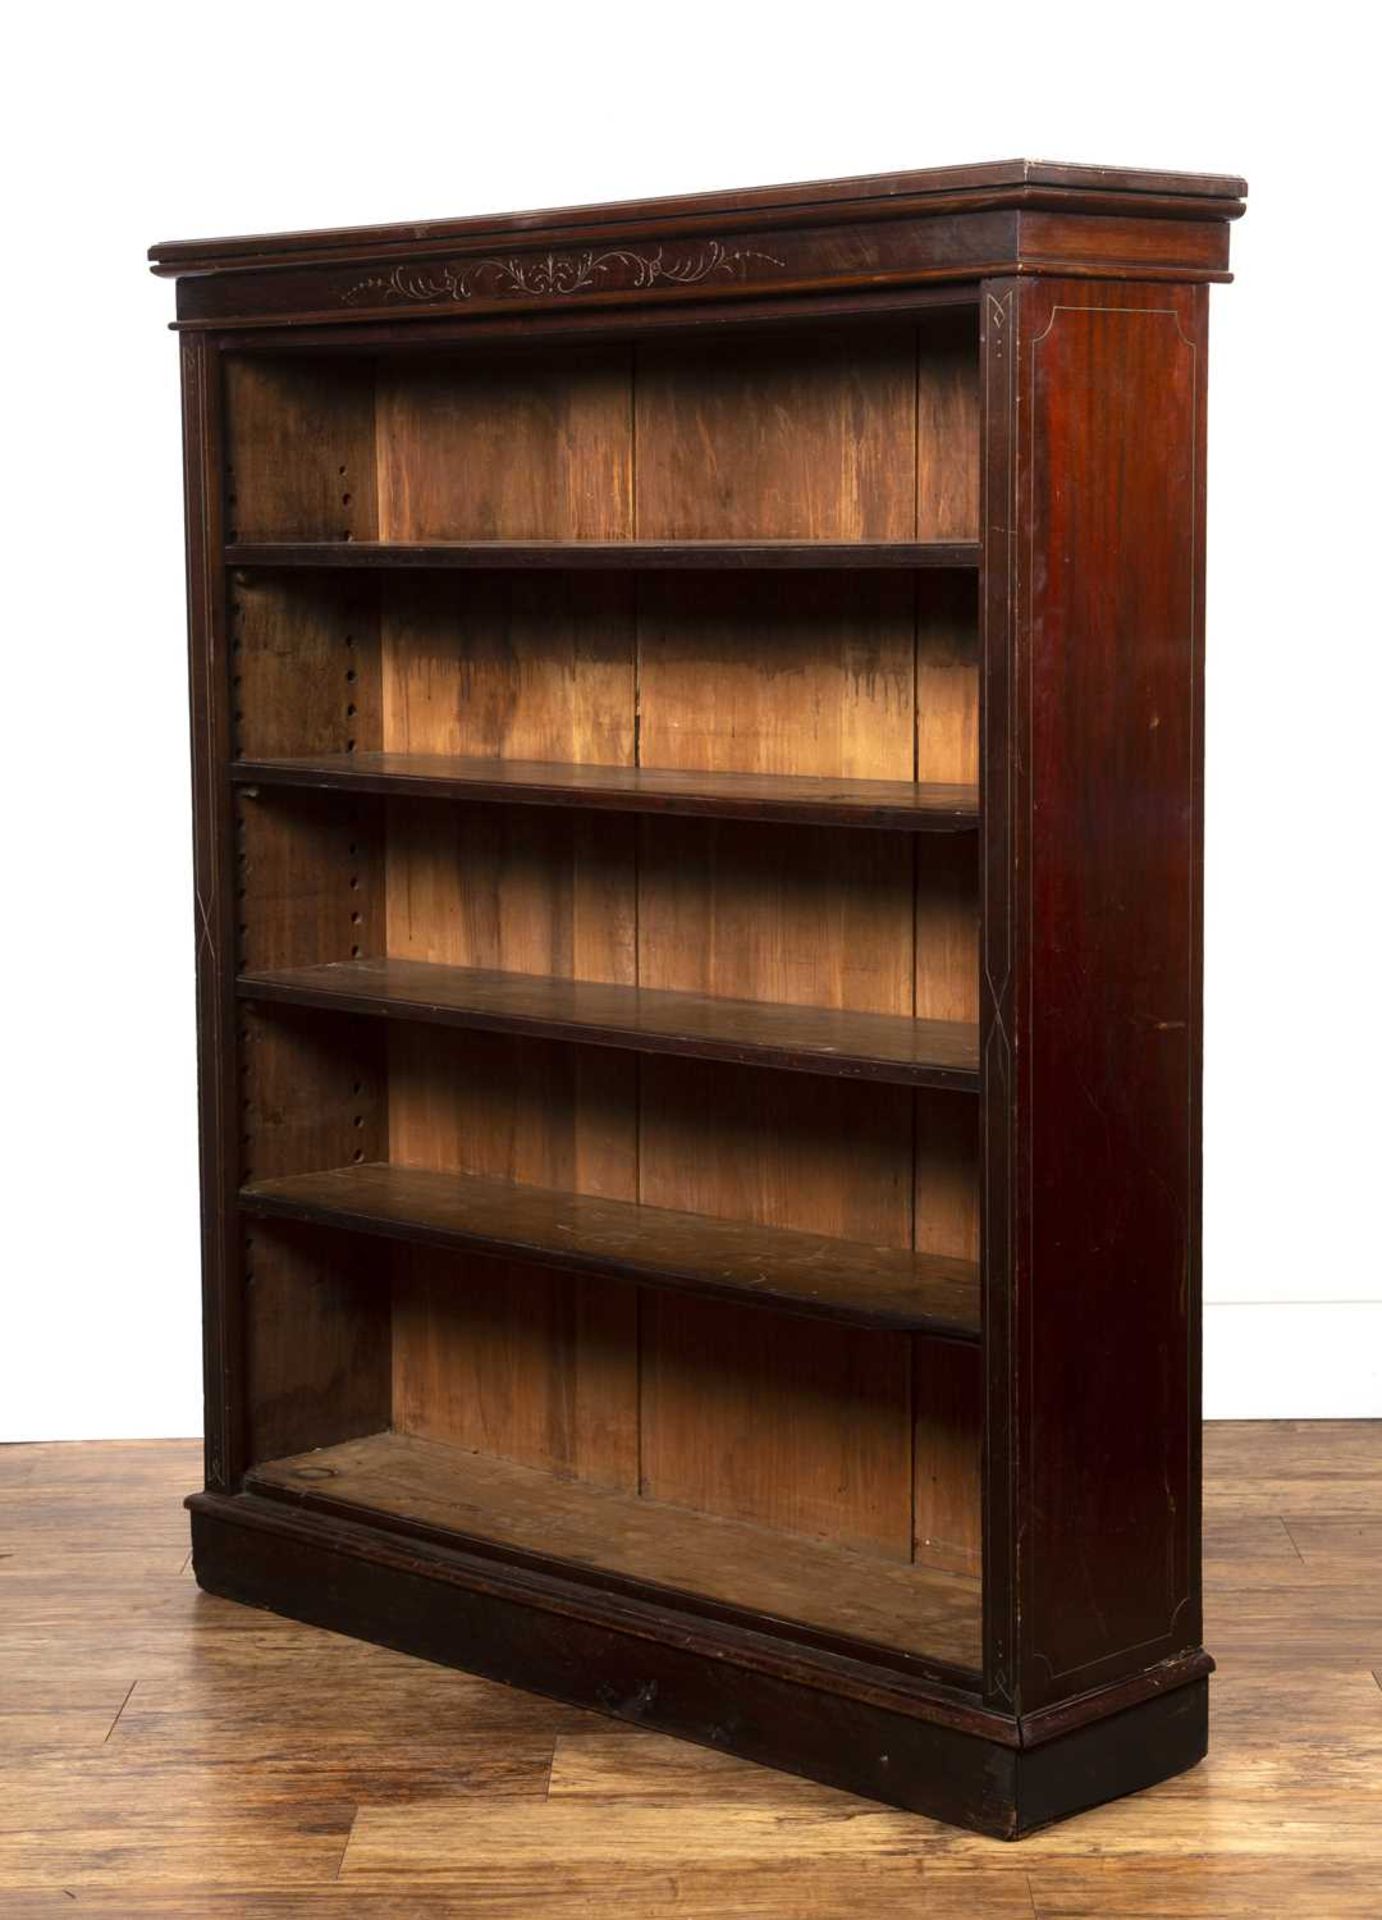 Mahogany open front large bookcase with four height-adjustable shelves, the outer frame with - Image 3 of 4